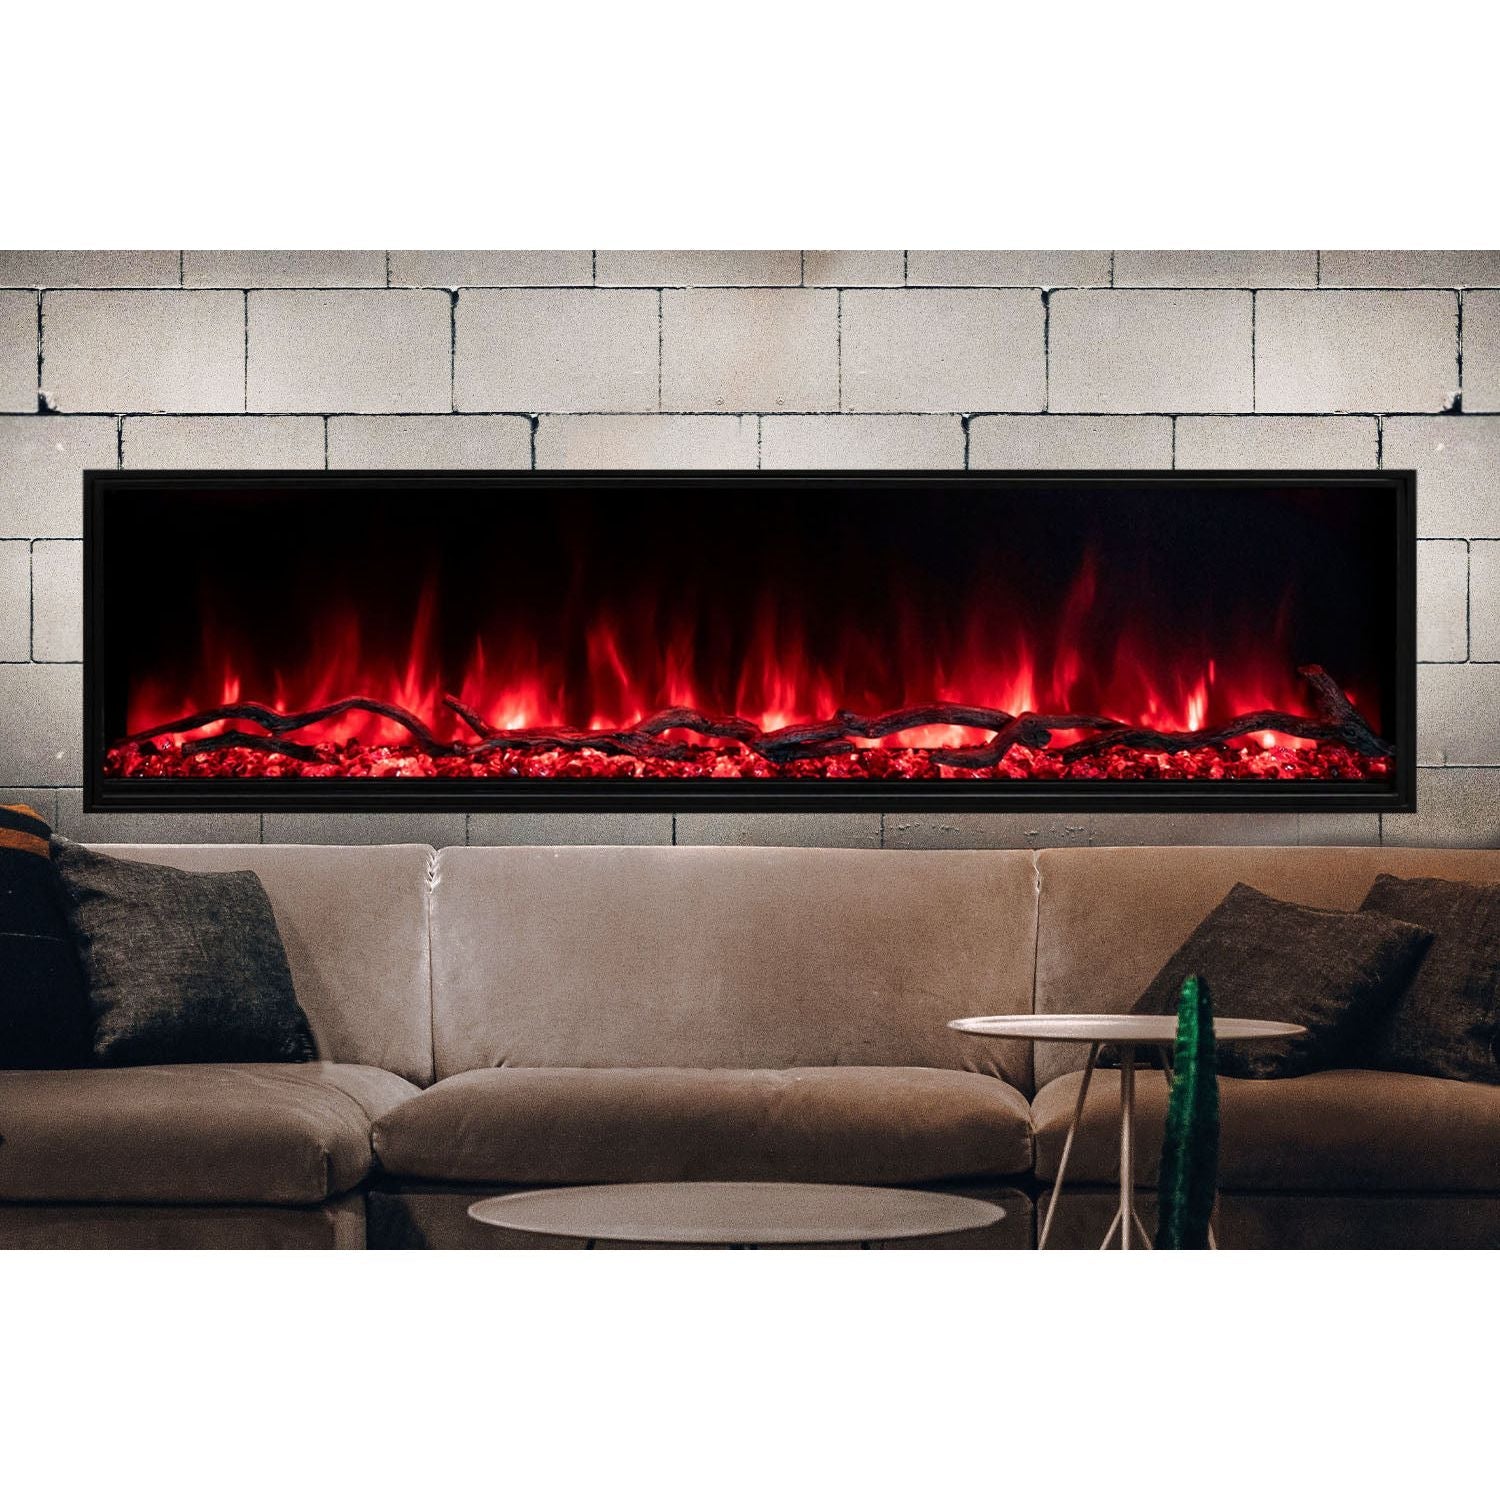 Modern Flames Modern Flames Landscape Pro Slim 96" Built In Linear Electric Fireplace Wall Mount Built In Electric Fireplace Standard Glass Screen / Remote Control (included) LPS-9614